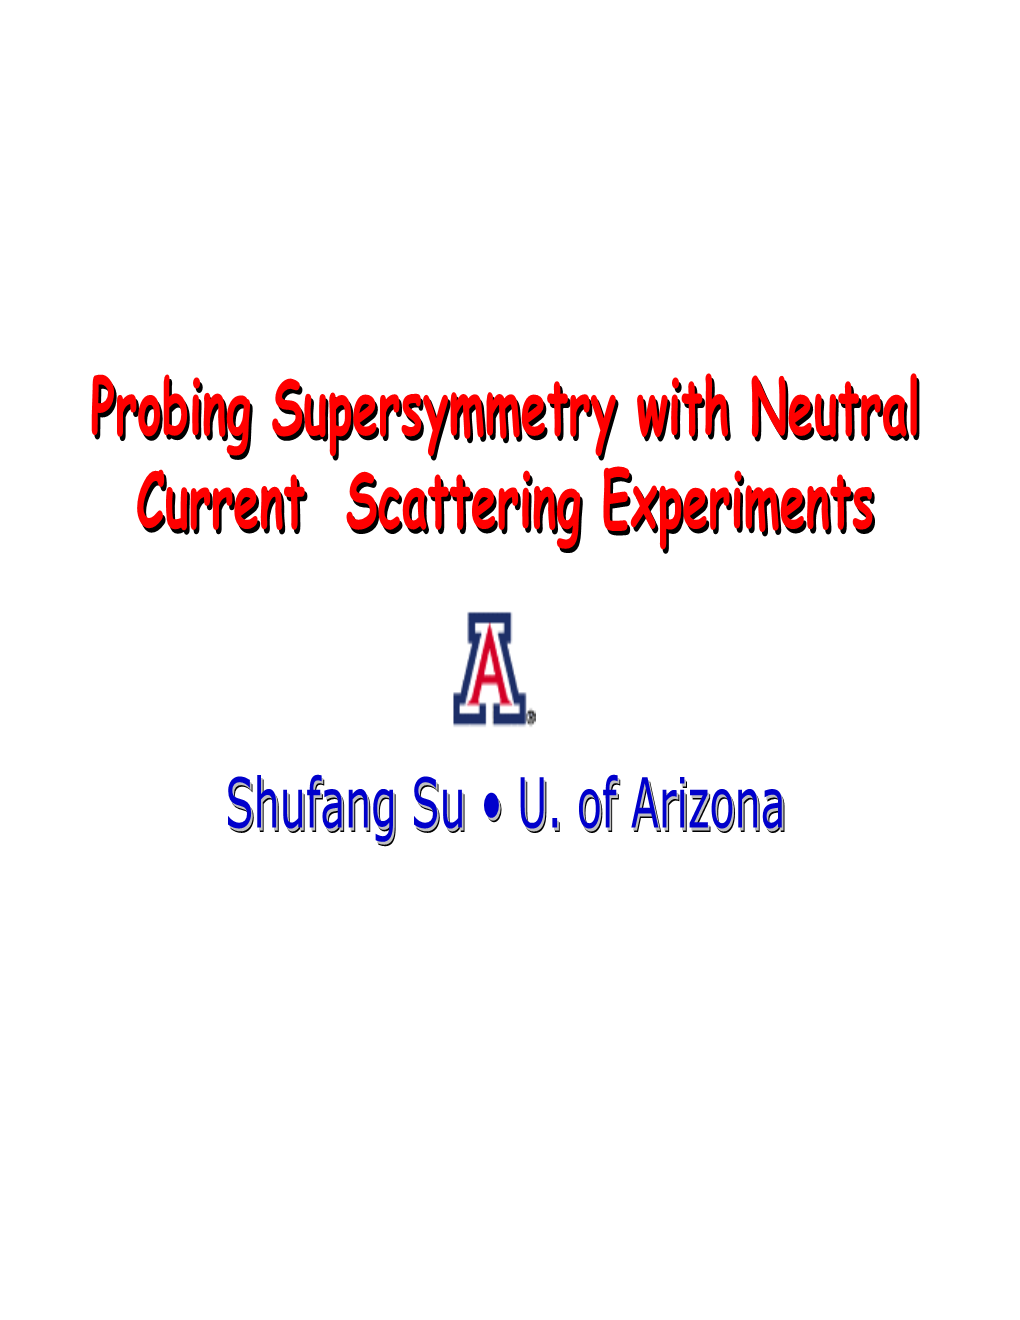 Probing Supersymmetry with Neutral Current Scattering